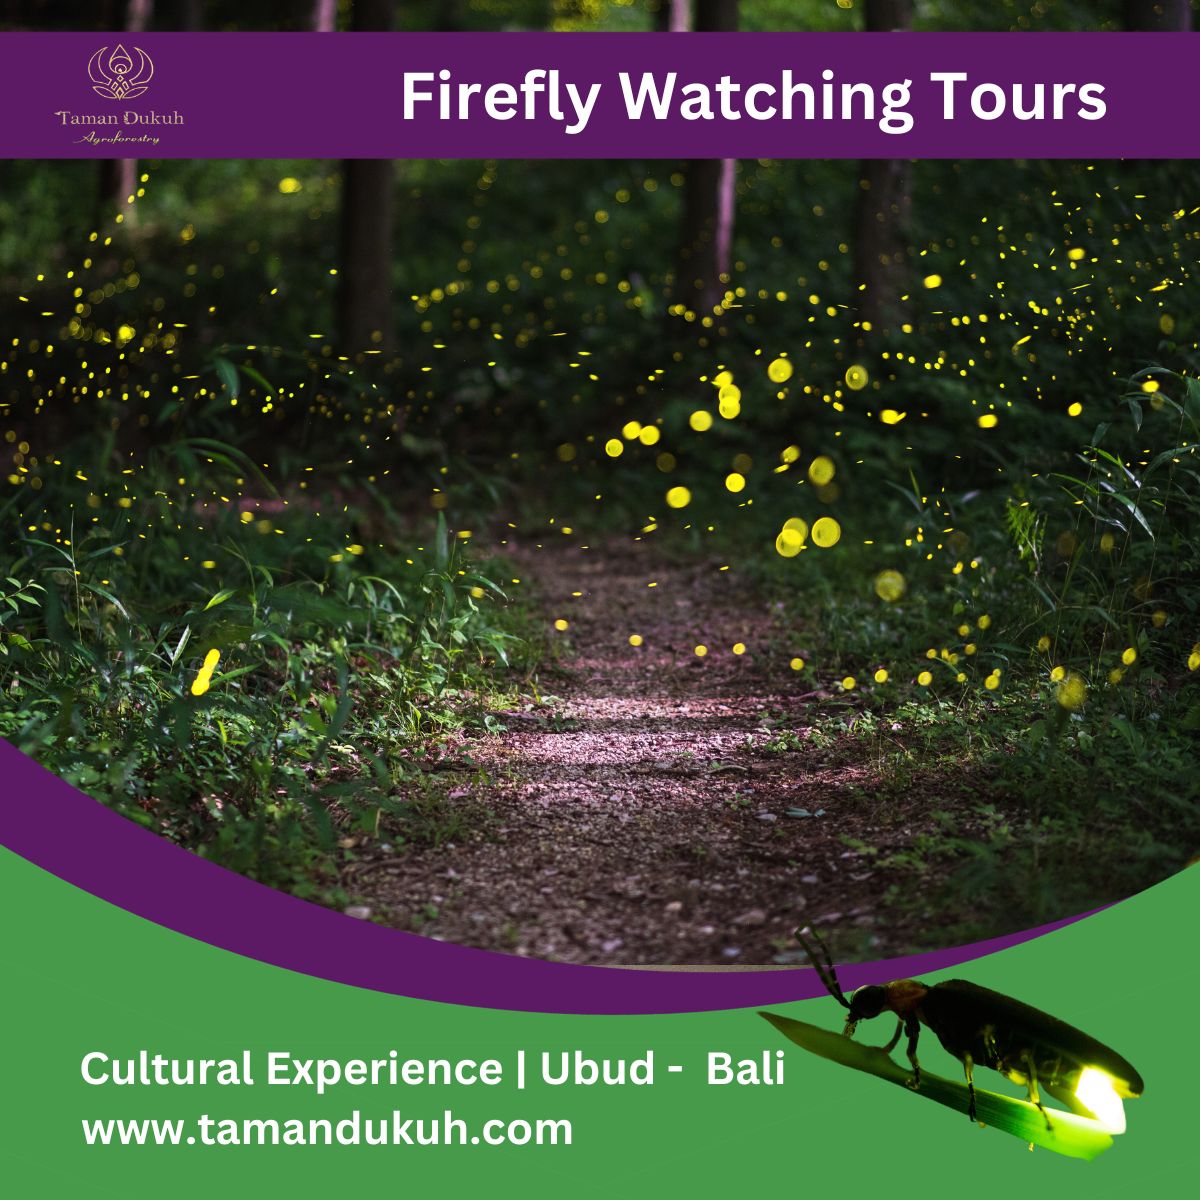 Taman Dukuh Cultural Experience Firefly Watching Tours